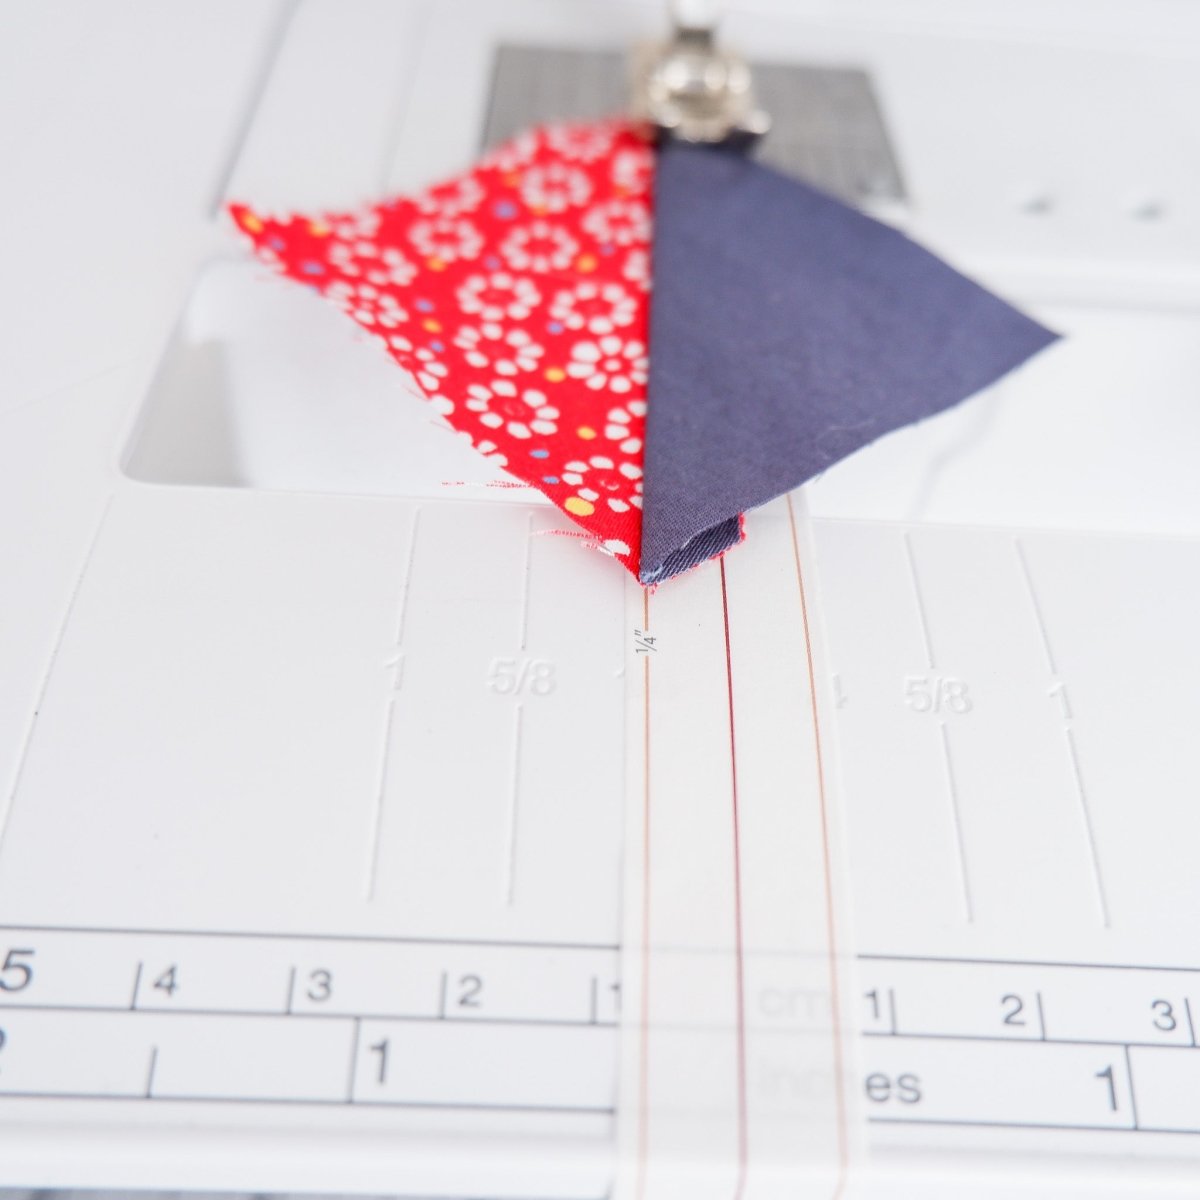 Showing the craft washi, MadamSew Quarter Inch Seam Tape ready for sewing.